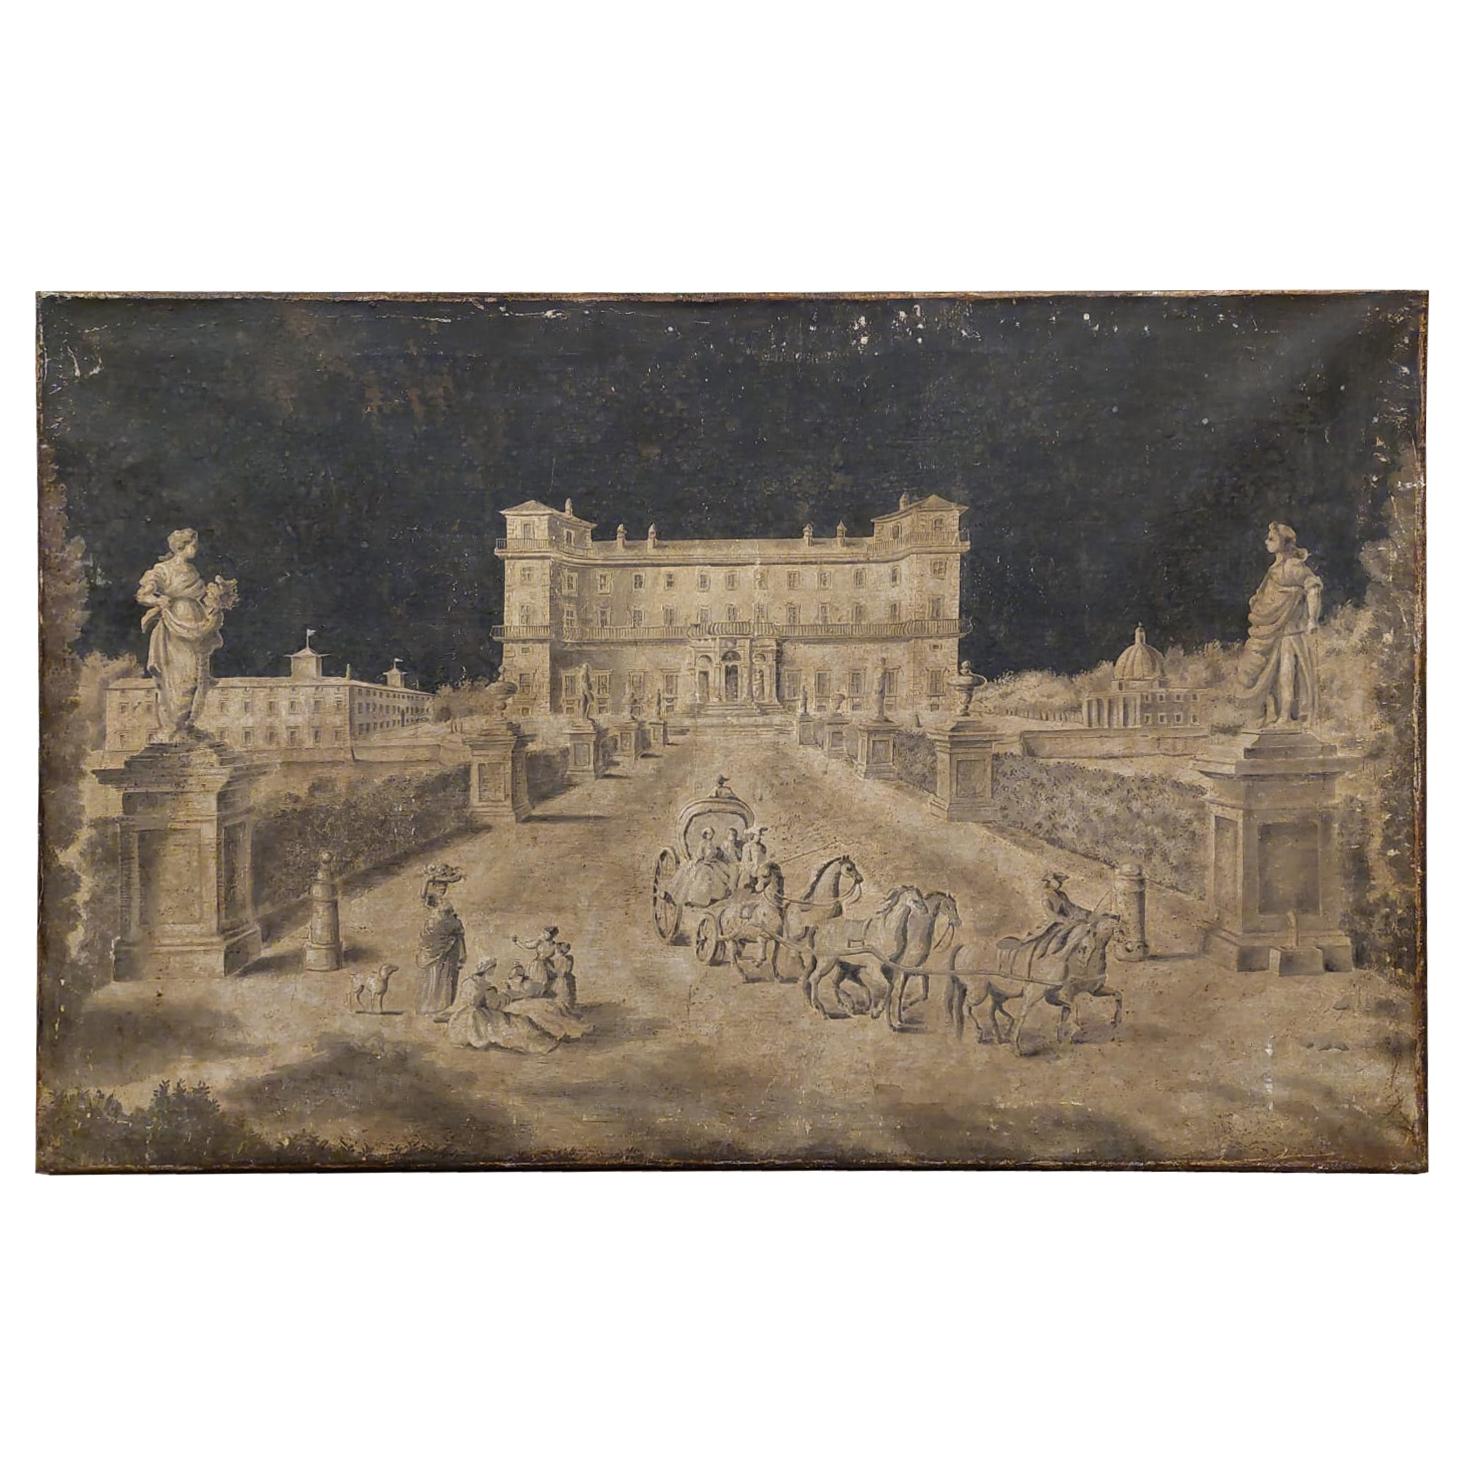 Antique Oil Painting on Canvas, 18th Century Villa in Black and White, Italy